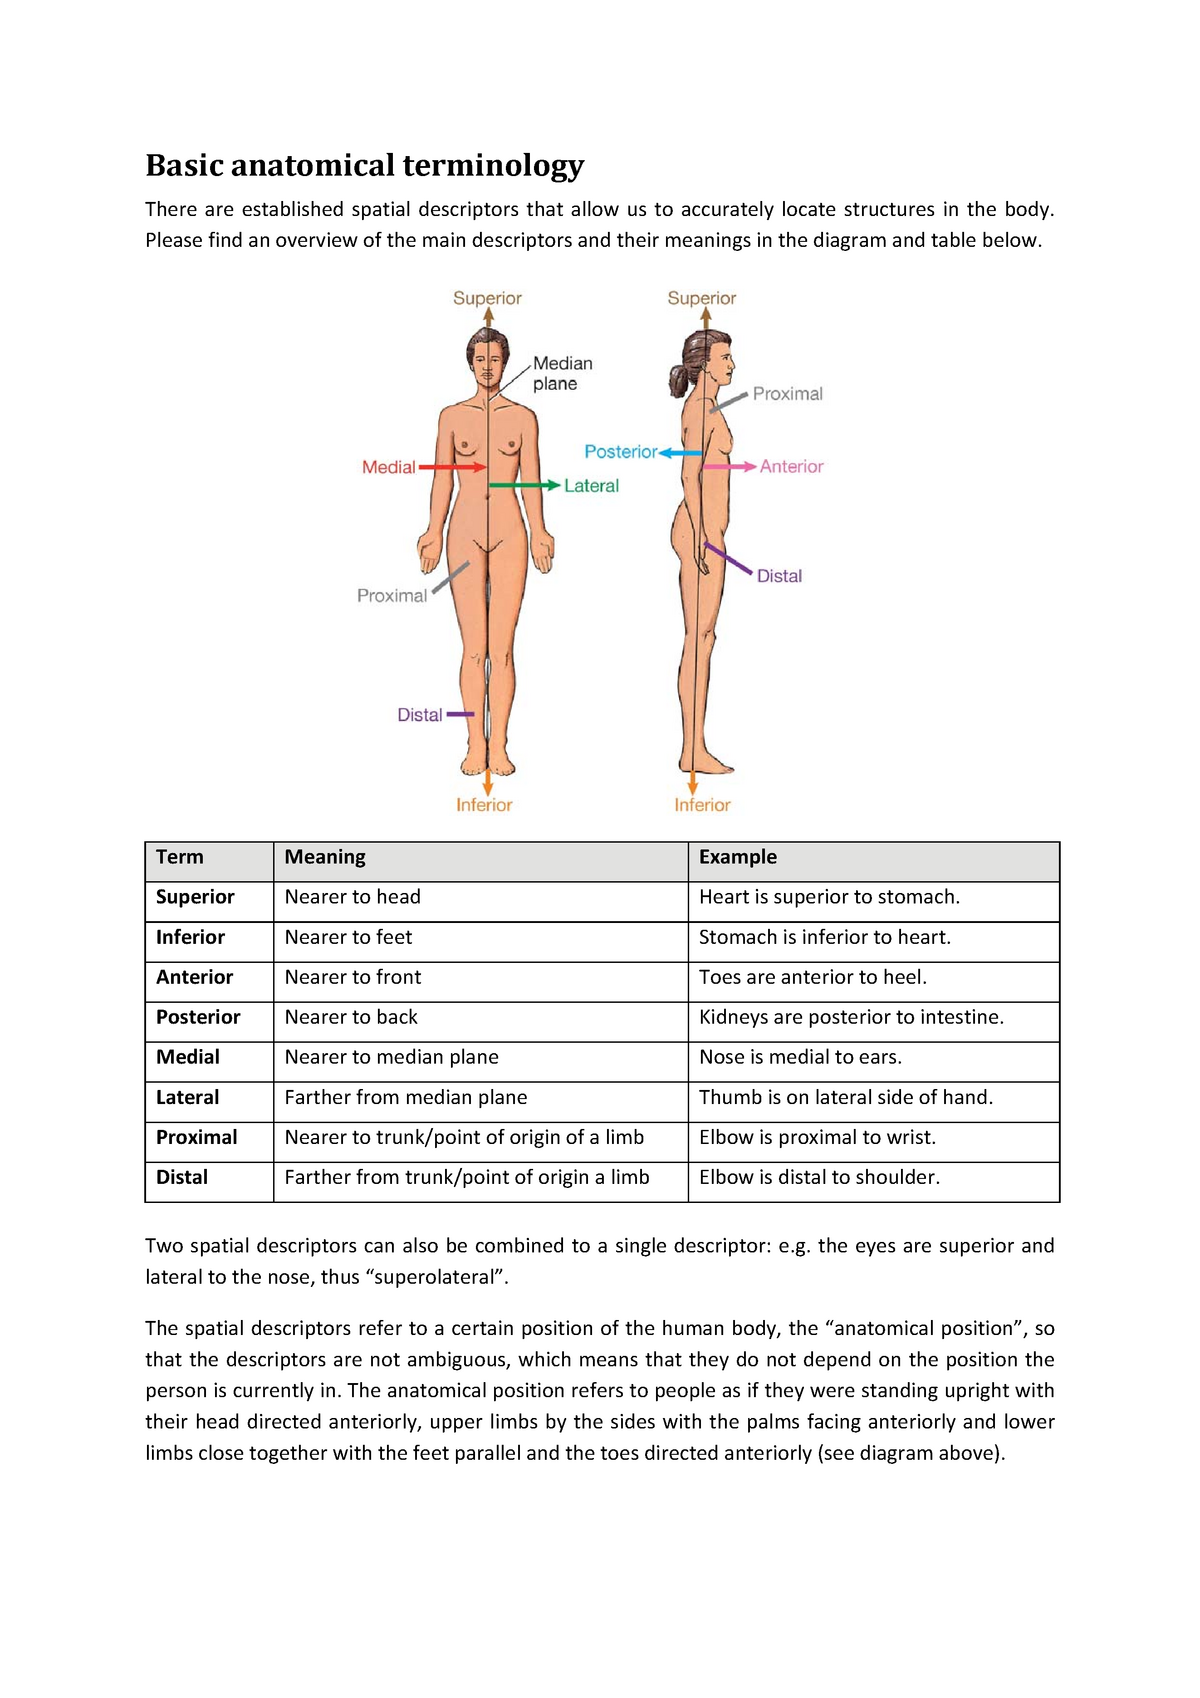 Basic anatomical terms - Basic anatomical terminology There are